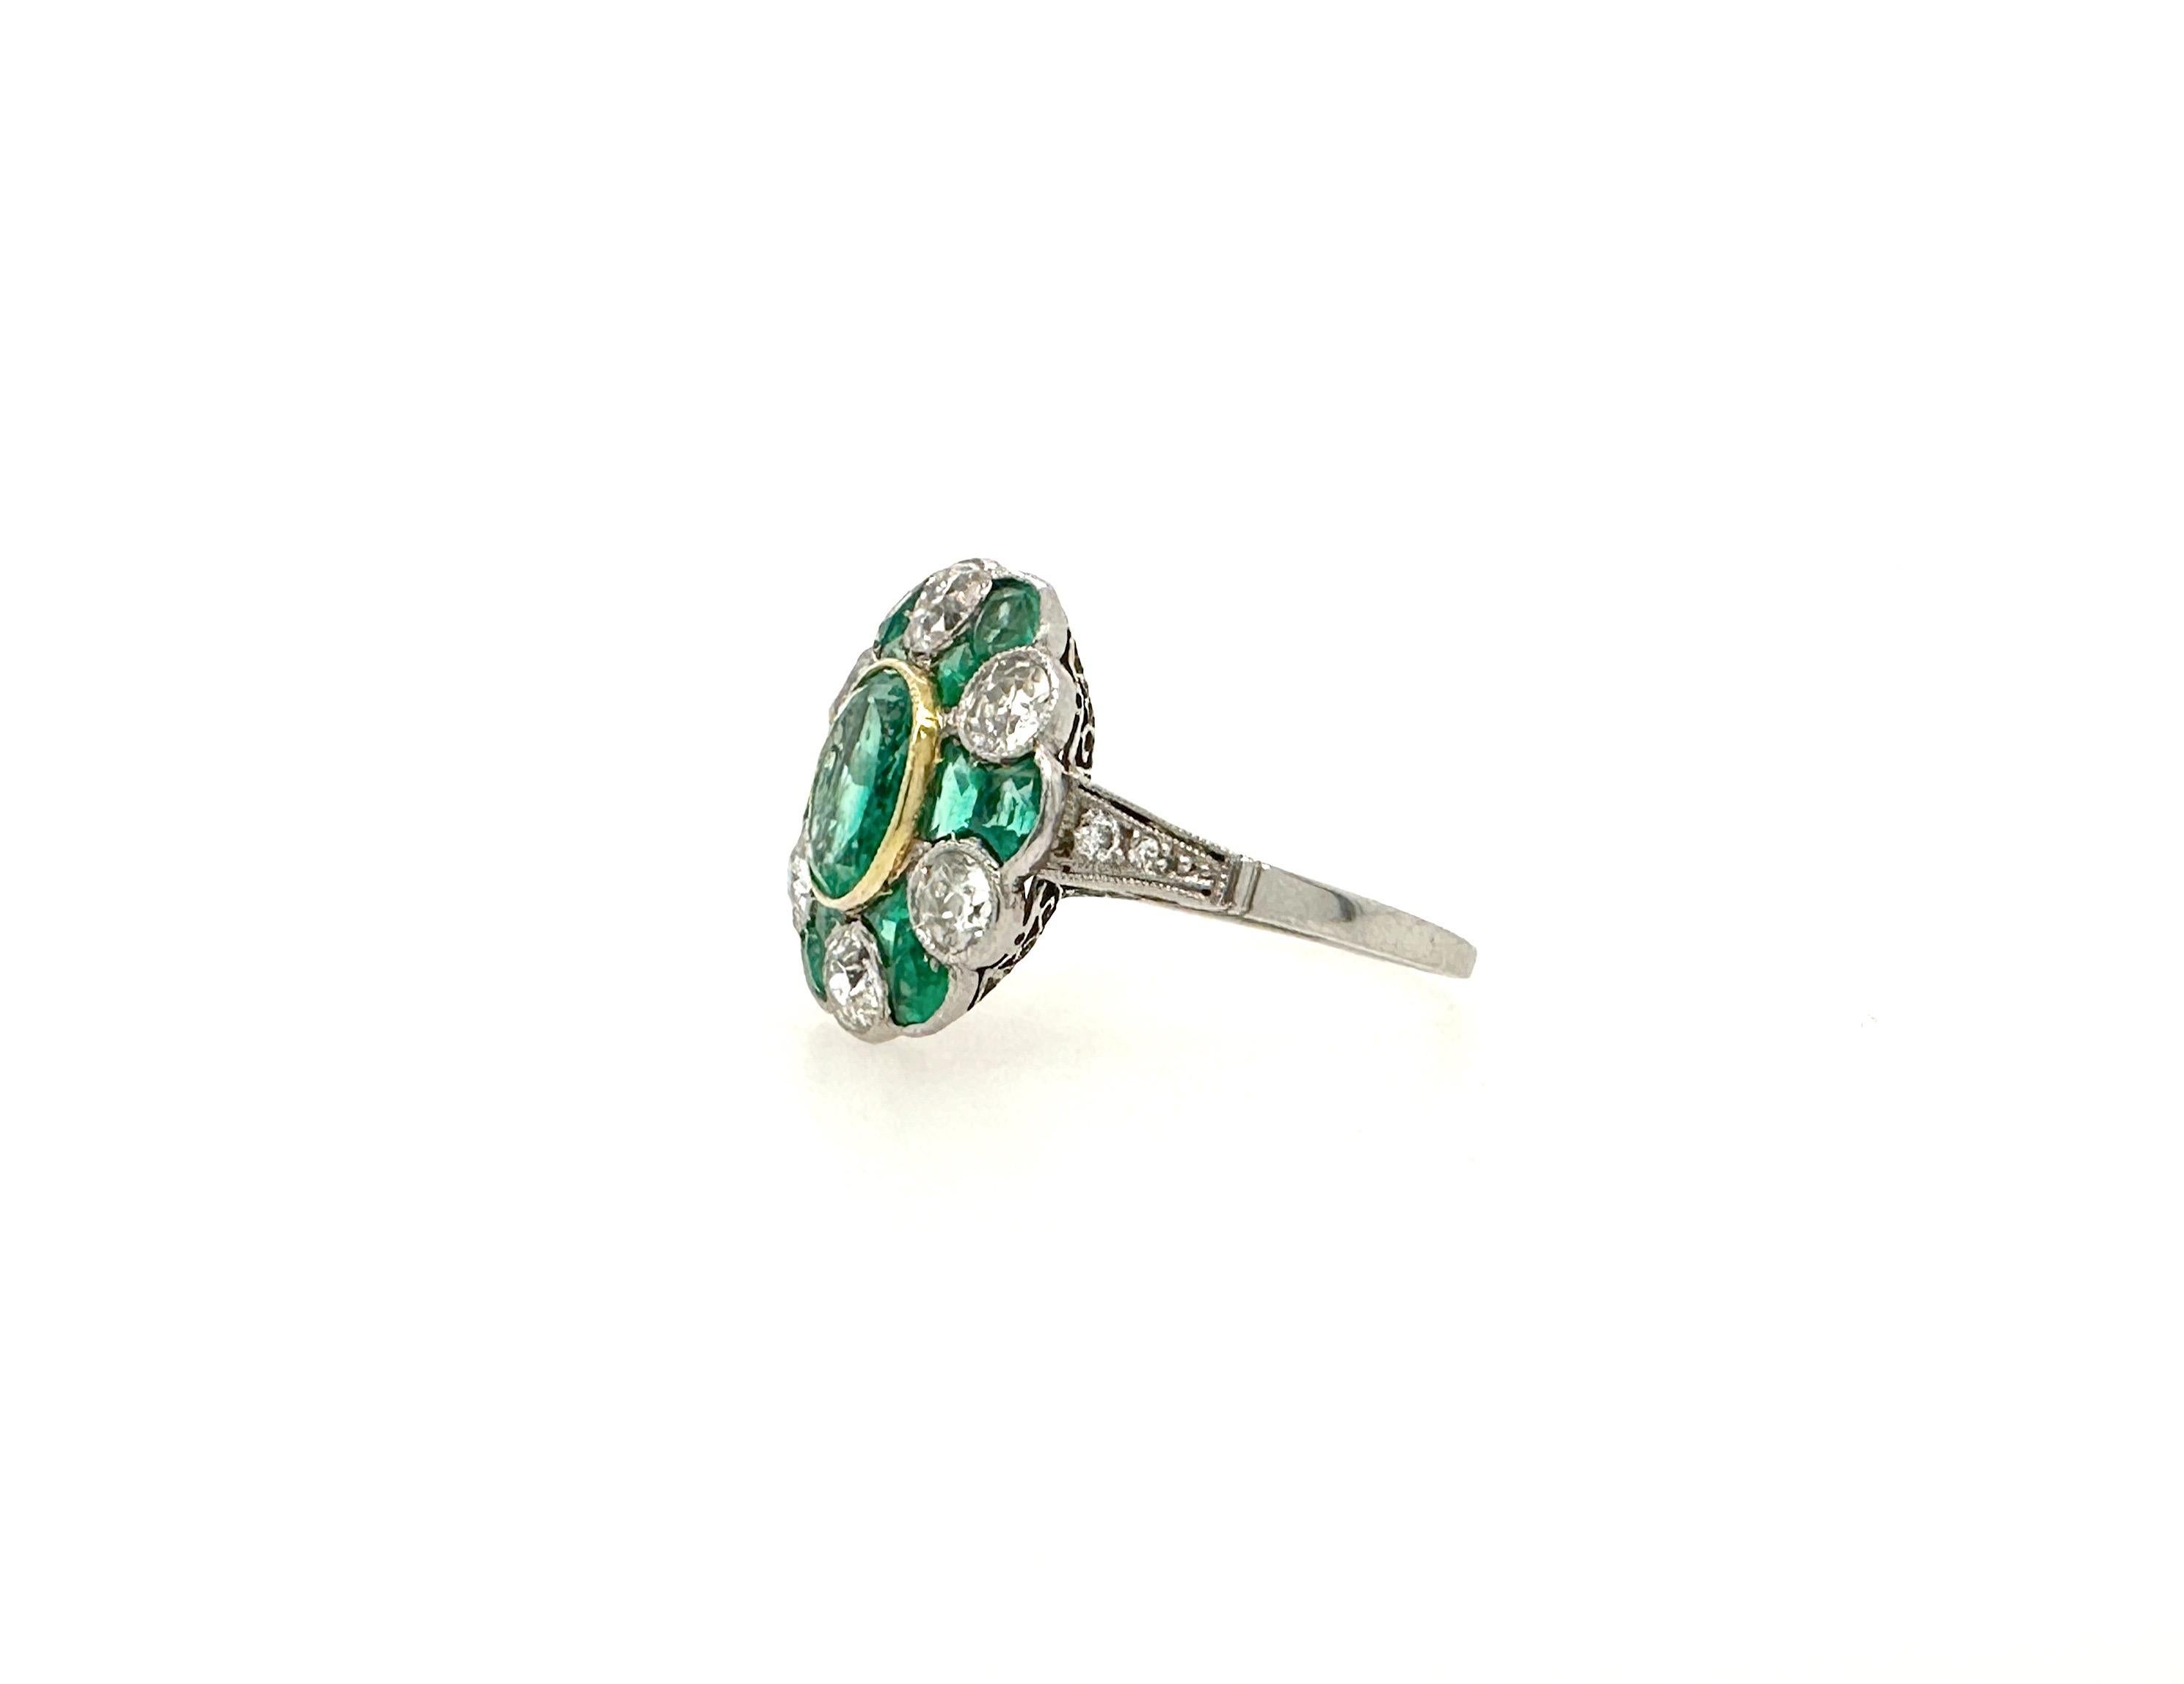 This Victorian era Colombian halo ring is a one of a kind piece of art.
Made of approximately 1 carat oval emerald and 1 carat mixed cut emerald halo along with approximately 1.25 carat total old mine cut diamonds halo it is a definite head